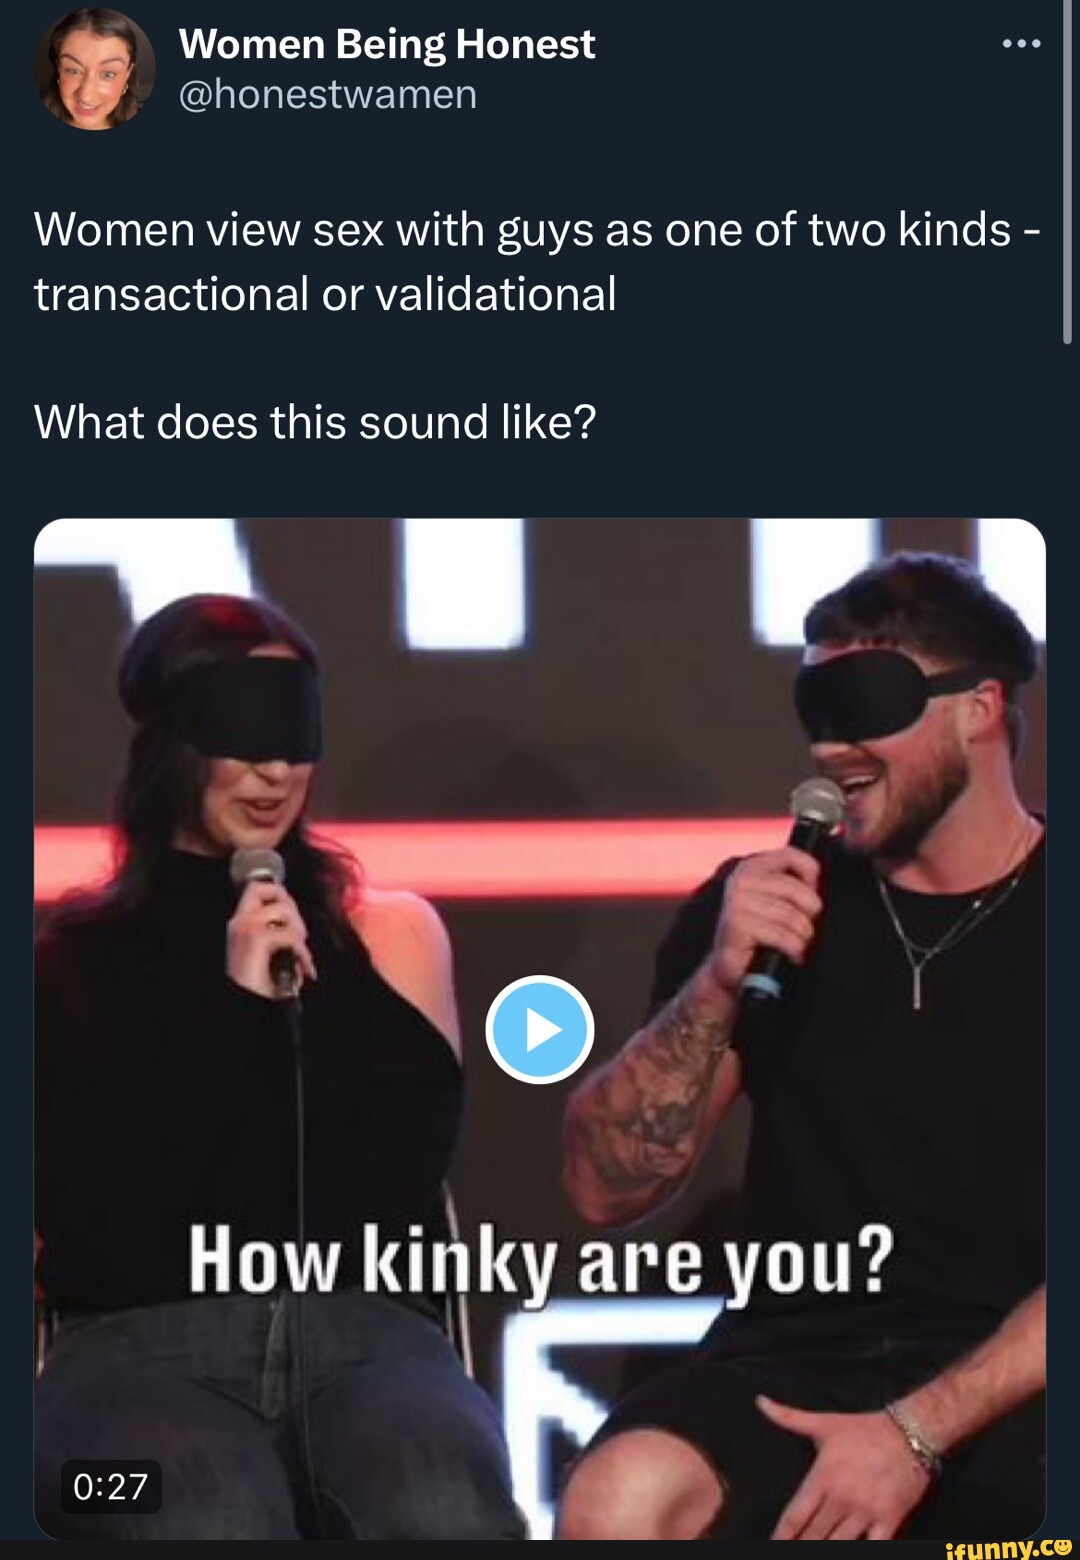 Women Being Honest Women view sex with guys as one of two kinds - transactional or validational What does this sound like? PS How kinky are you? I image picture